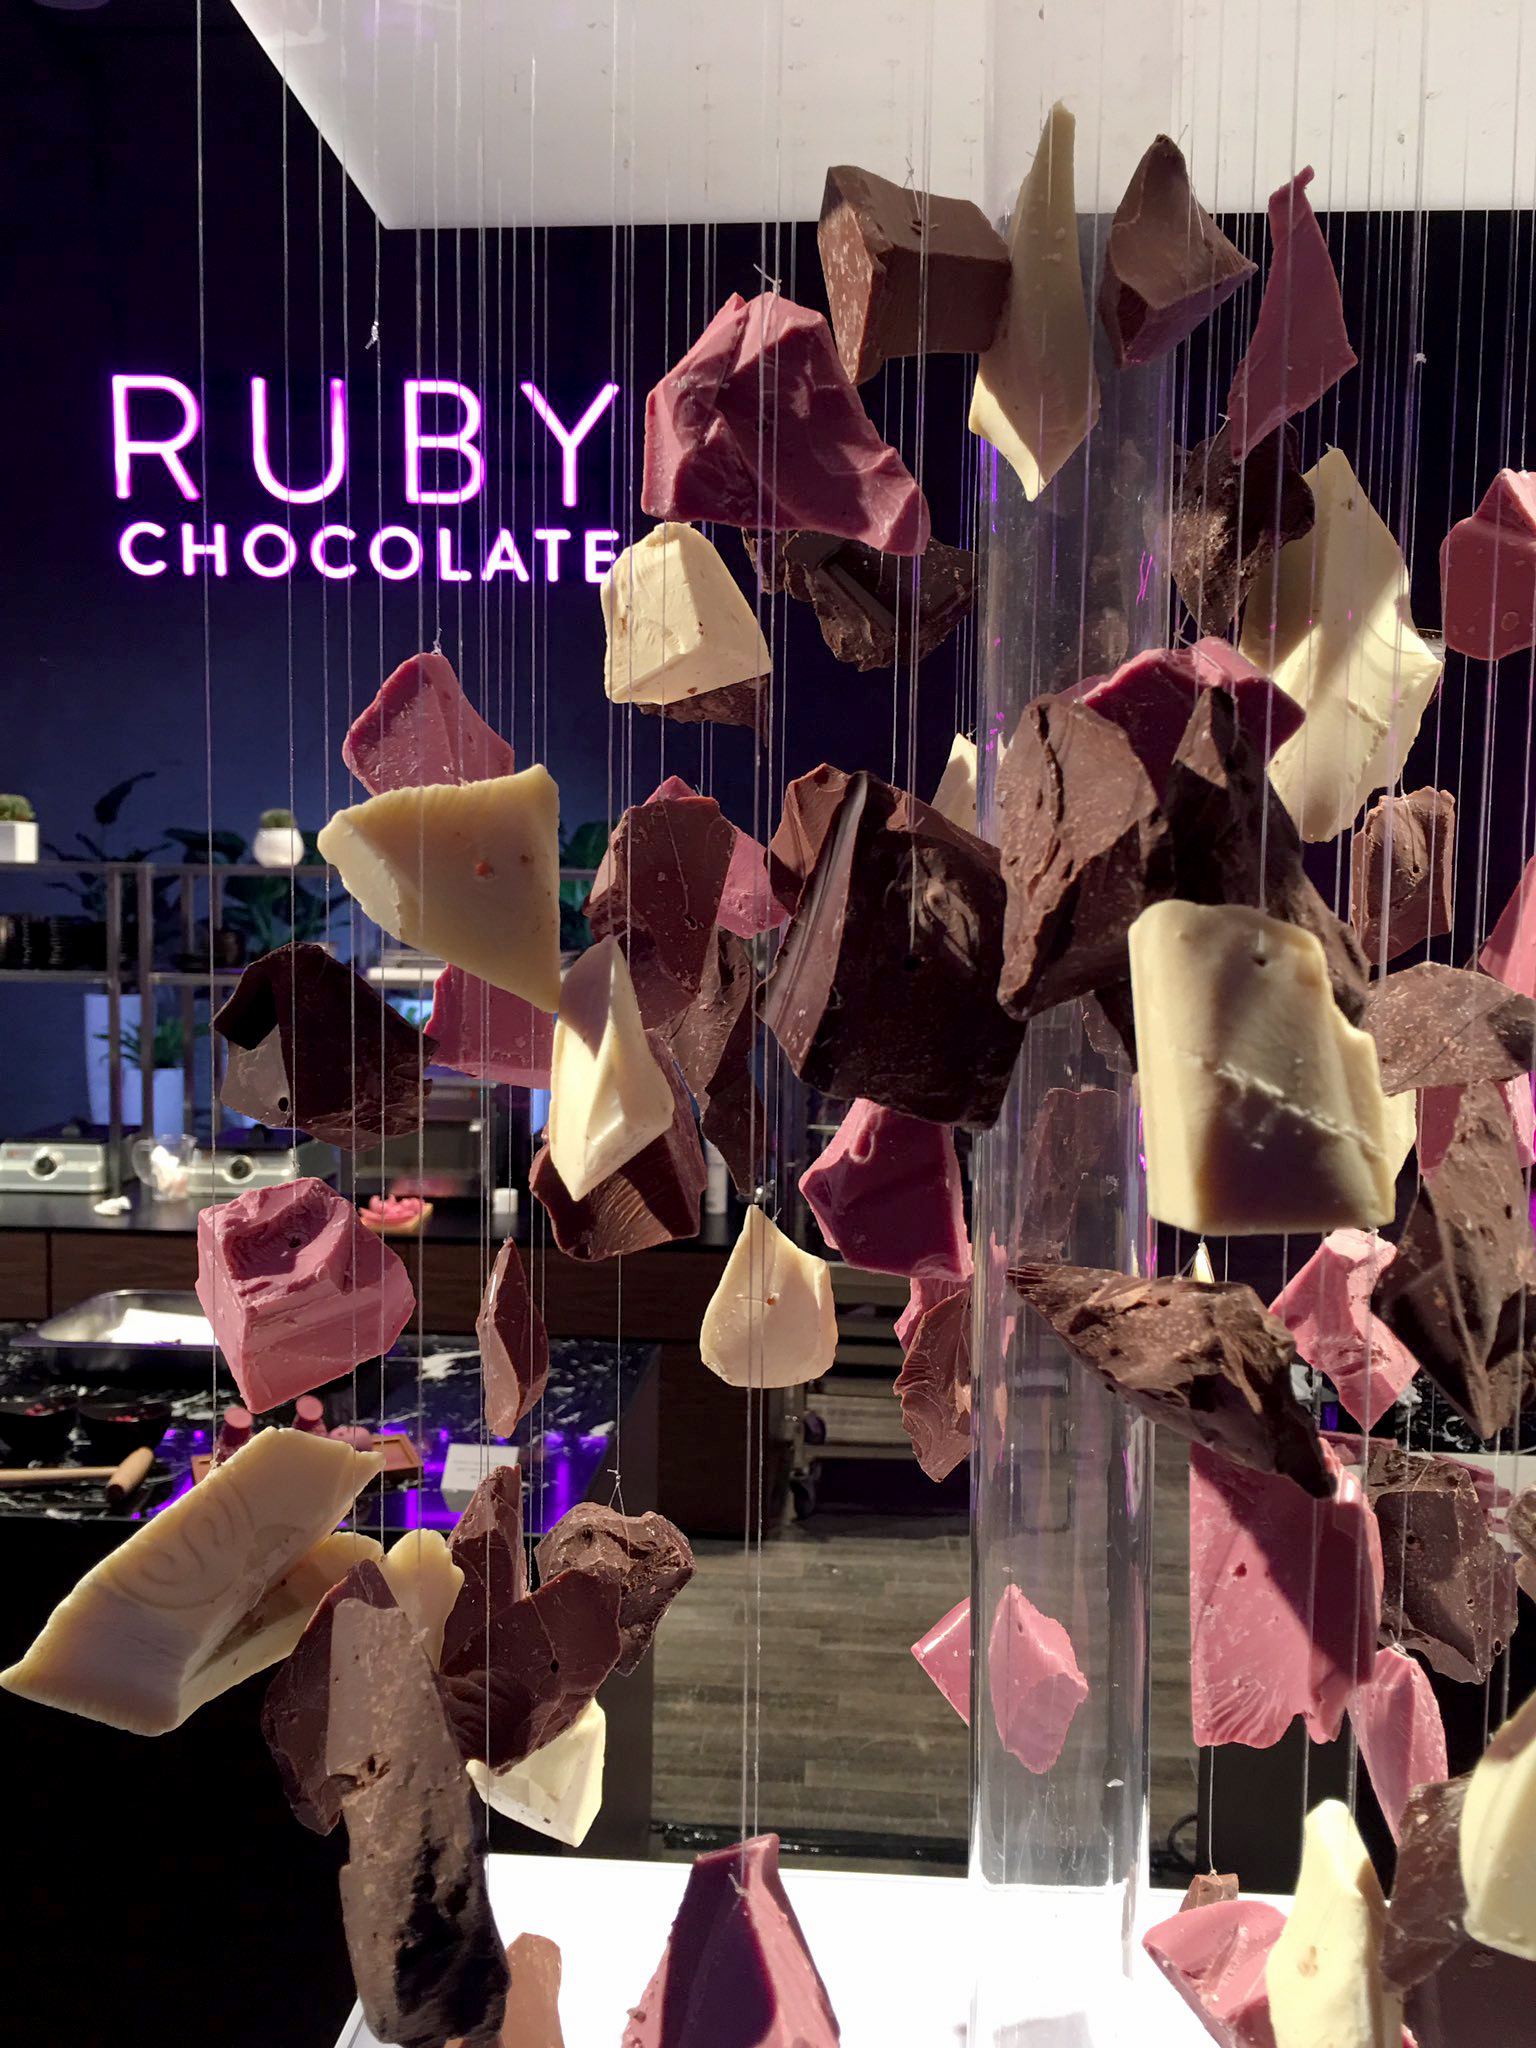 PHOTO: Swiss chocolate makers Barry Callebaut unveiled "Ruby chocolate" at a launch event on Sept. 5, 2017.